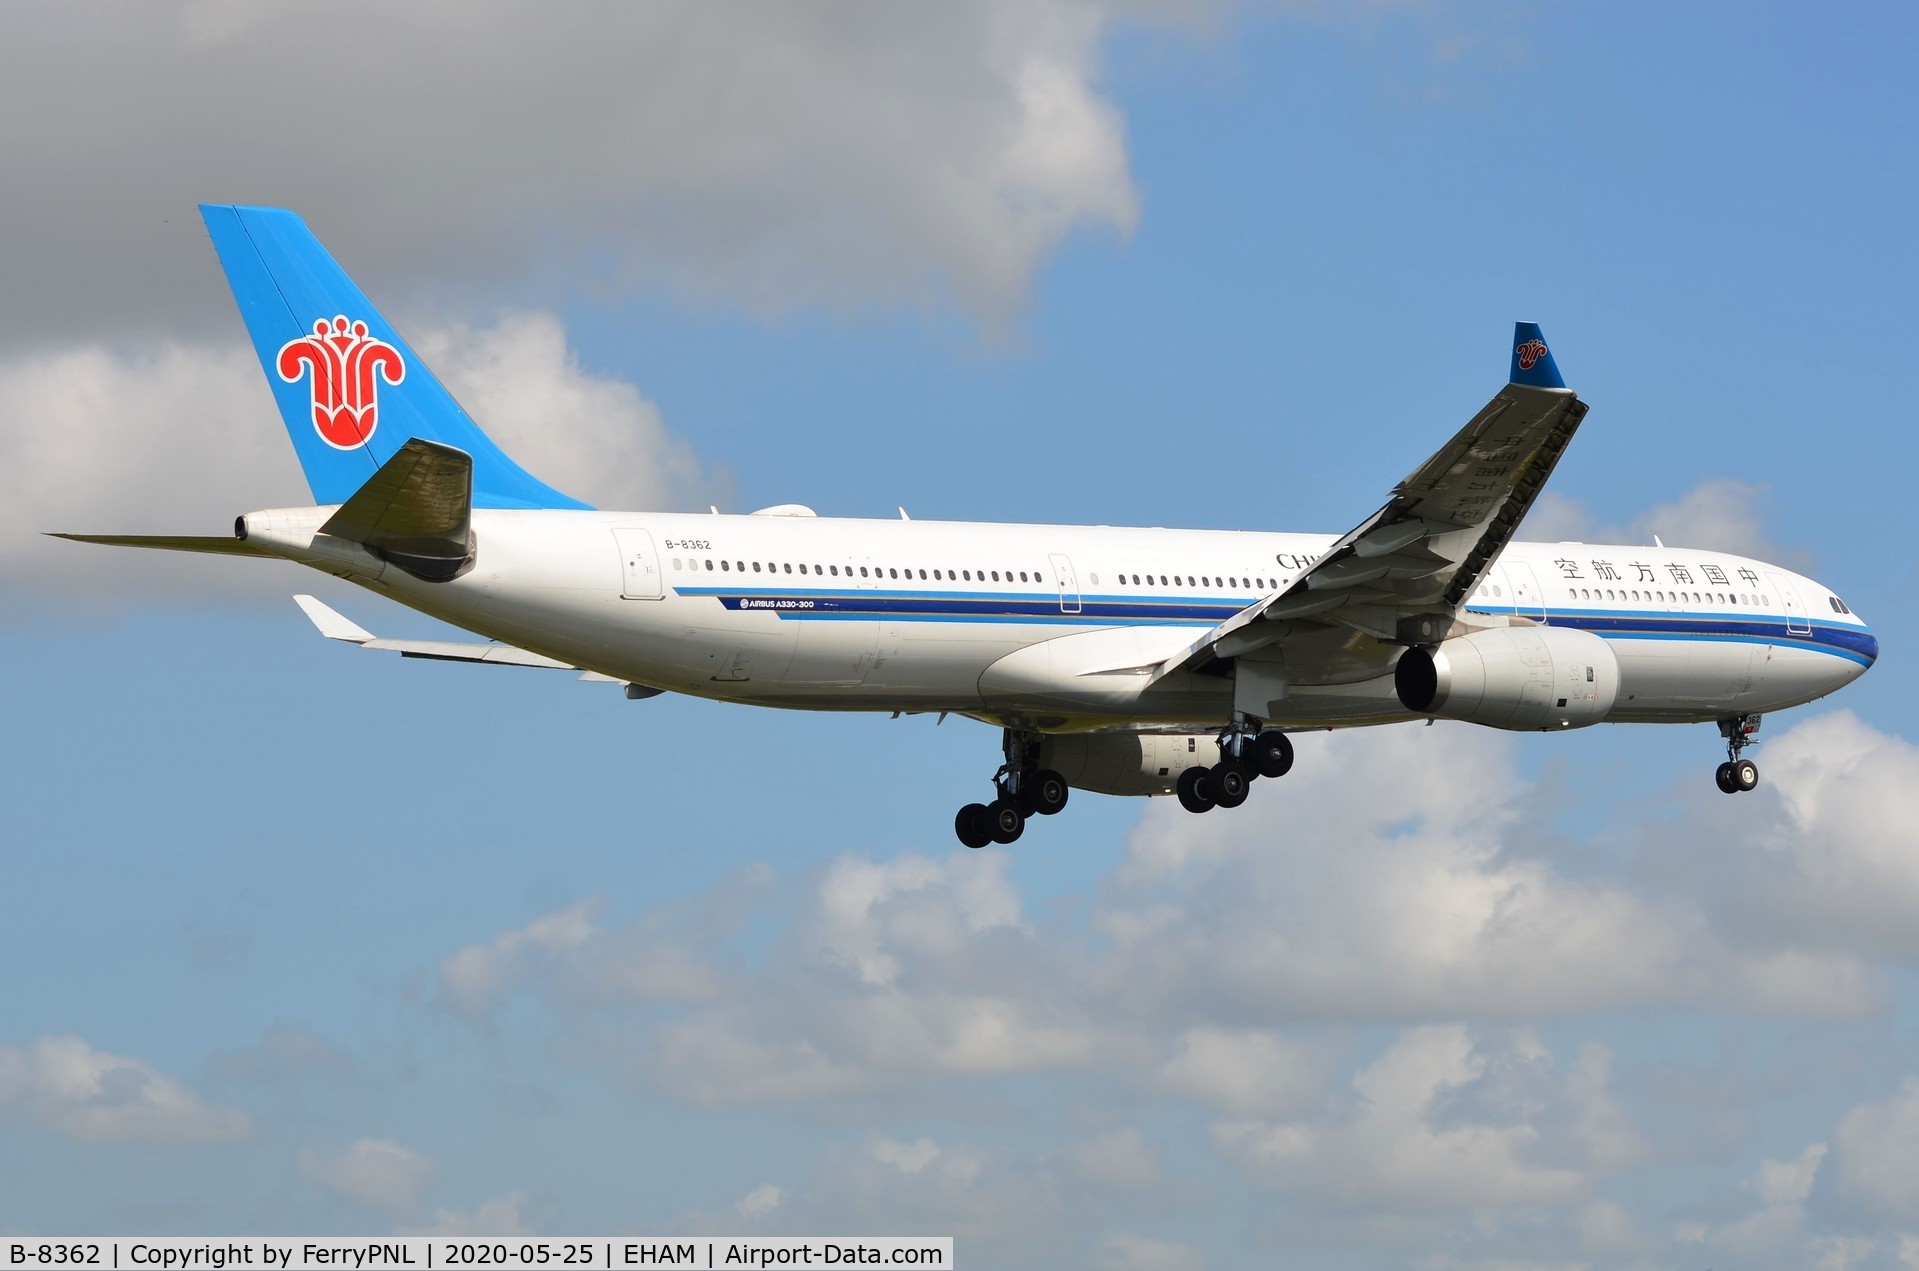 B-8362, 2017 Airbus A330-343 C/N 1815, China Southern A333 on short final